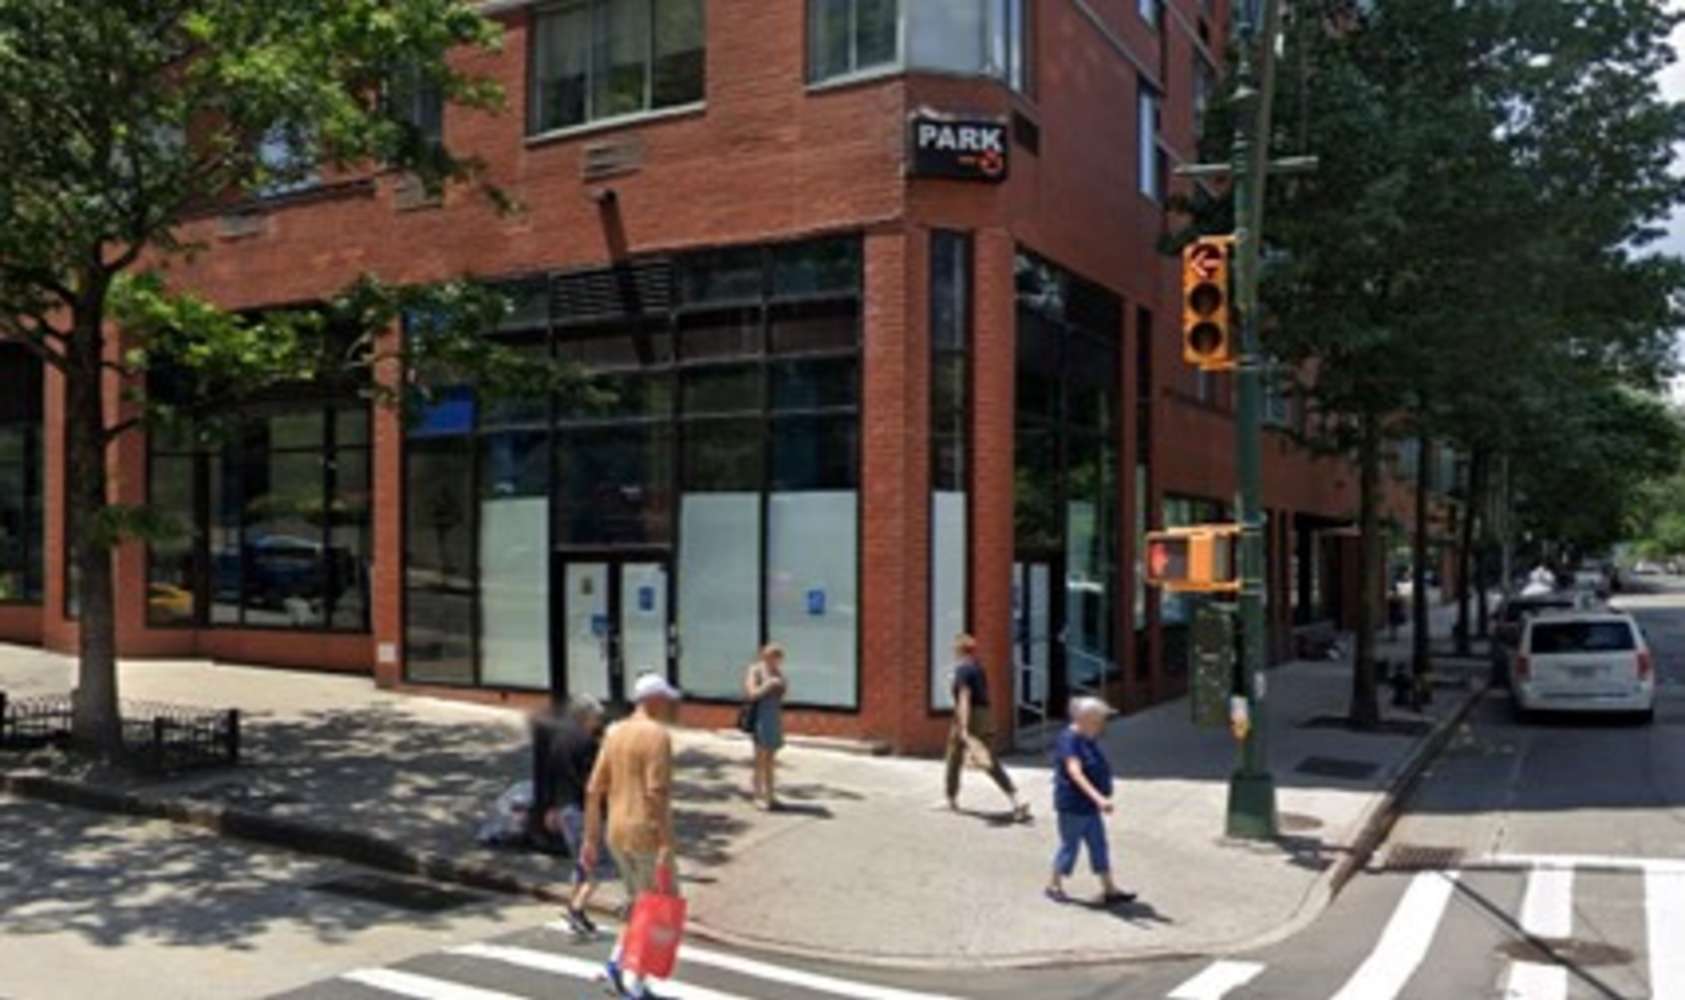 Retail New york - Bank site for sublease 7882630 - COLUMBUS & 79TH - New York, NY